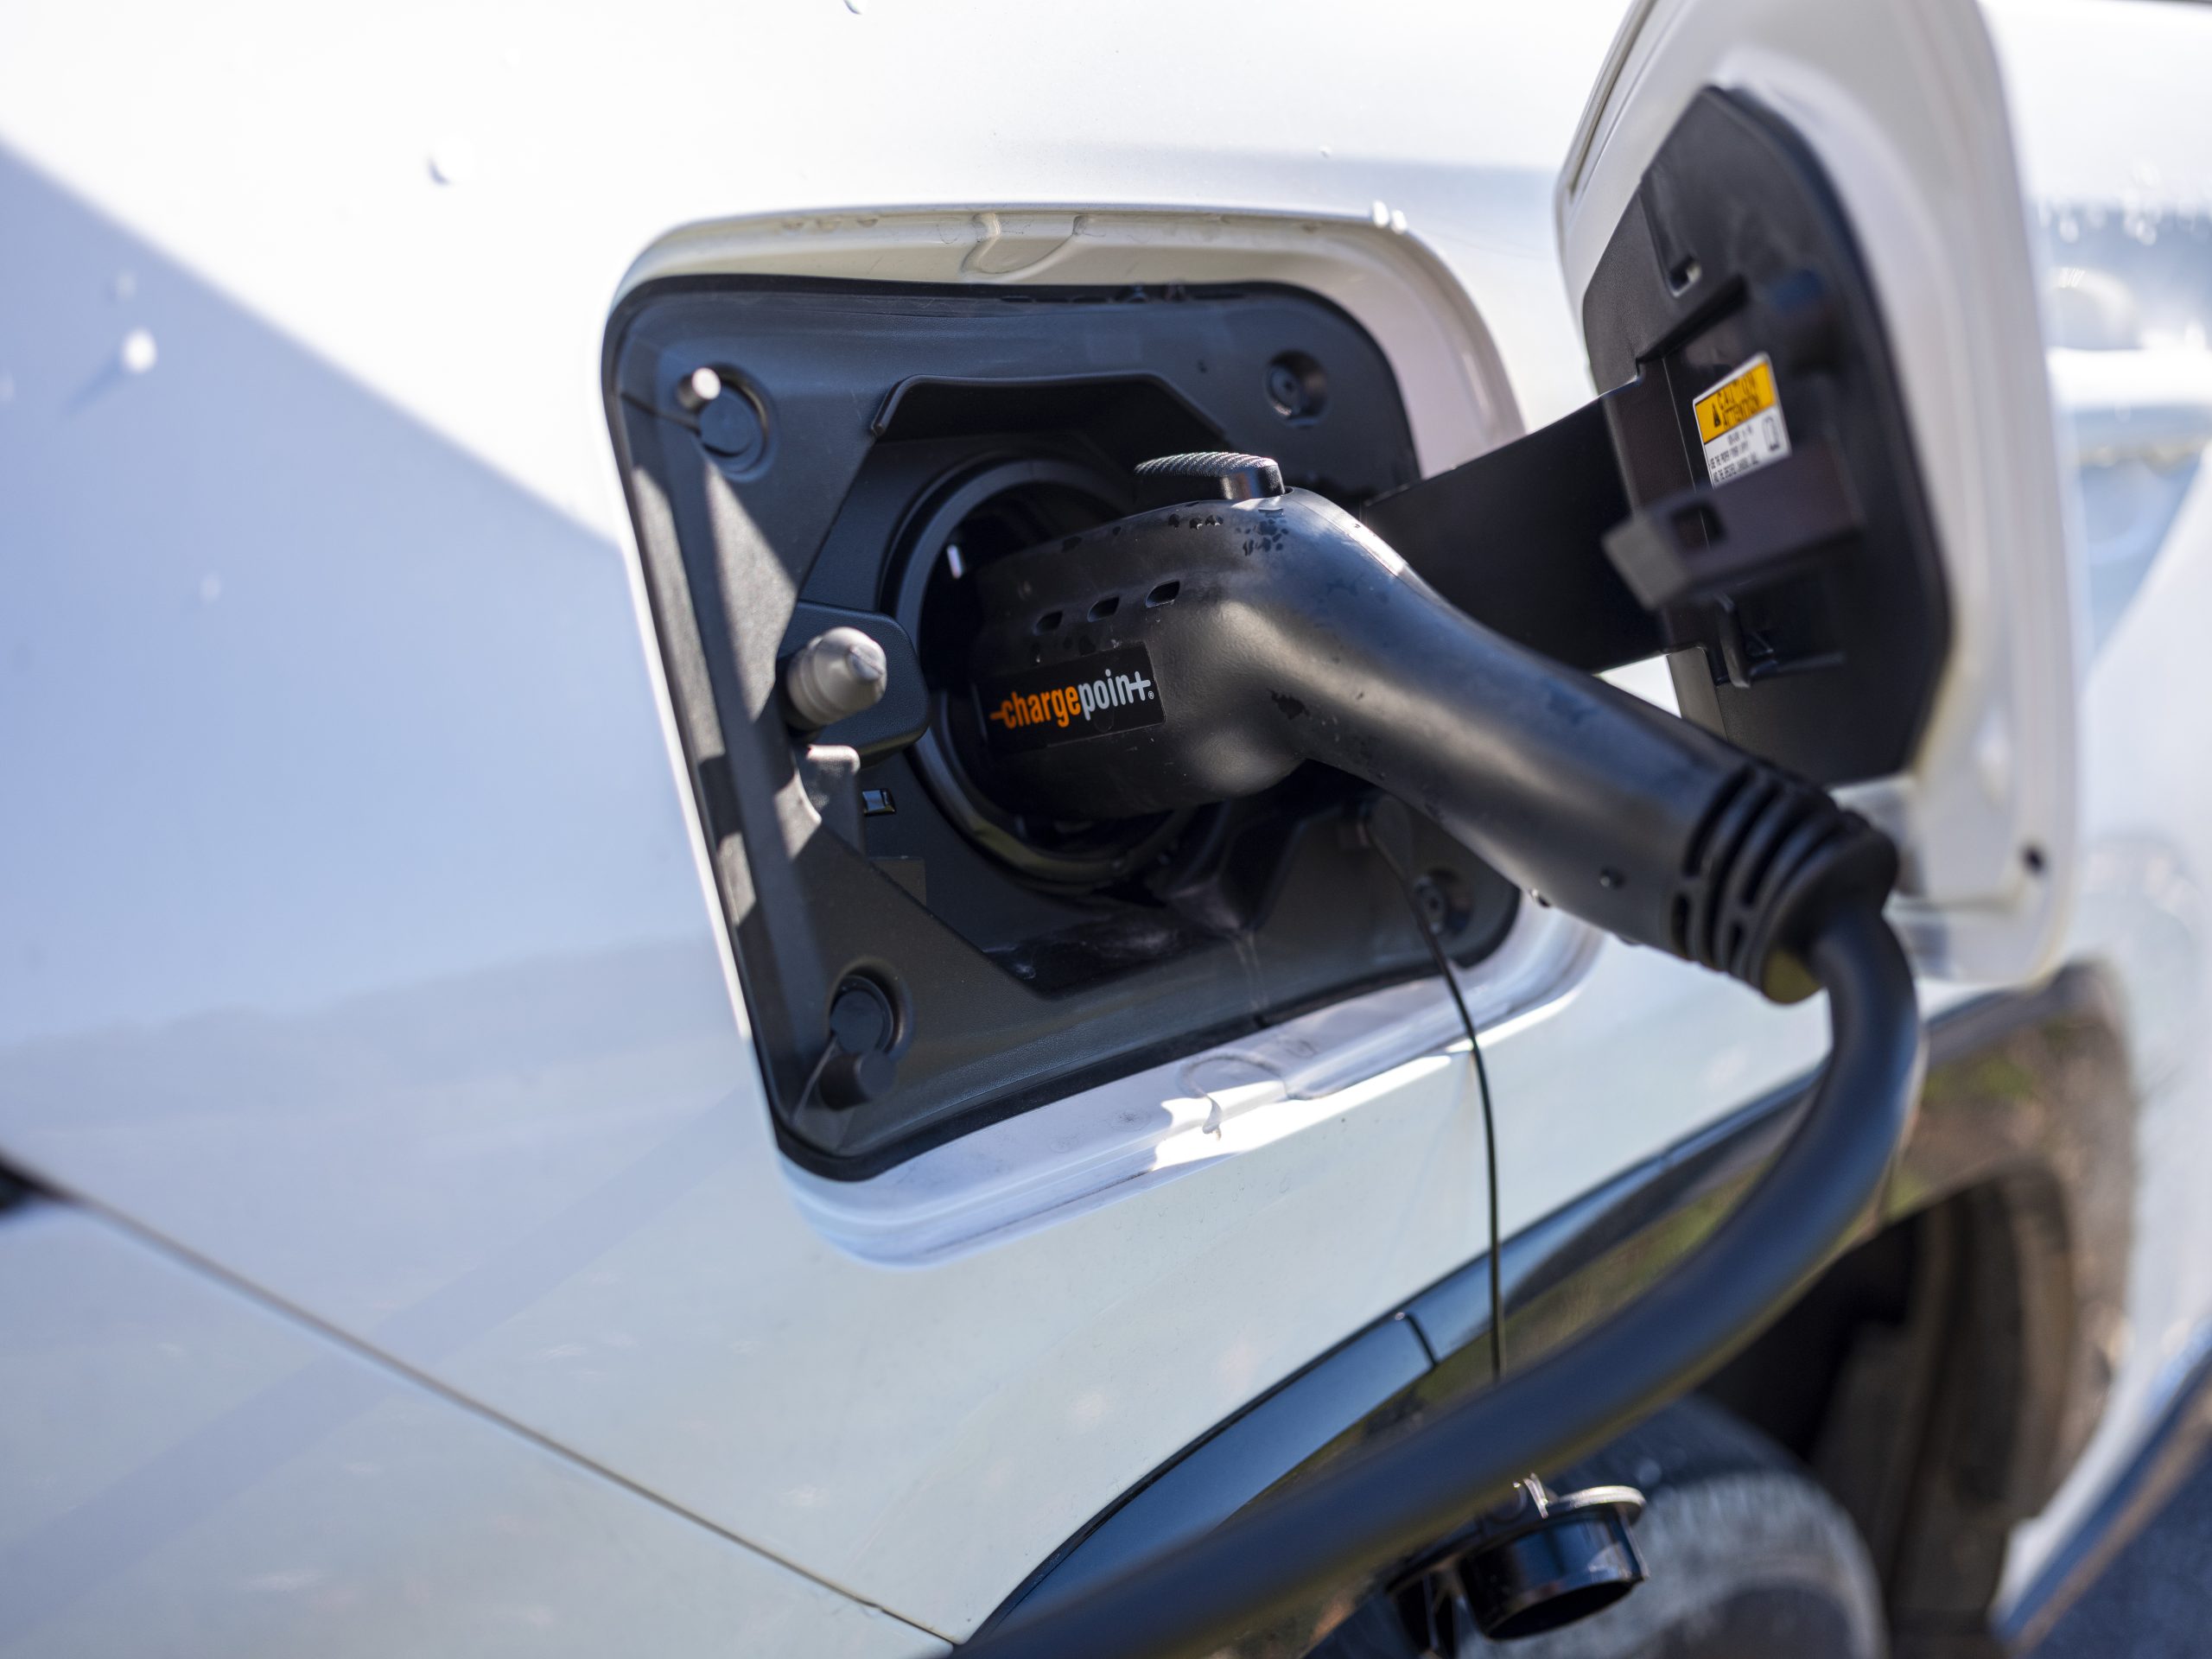 To put more electric vehicles on the road, Illinois will need more charging stations, and it currently lags behind several other states. (Credit: Getty file photo)